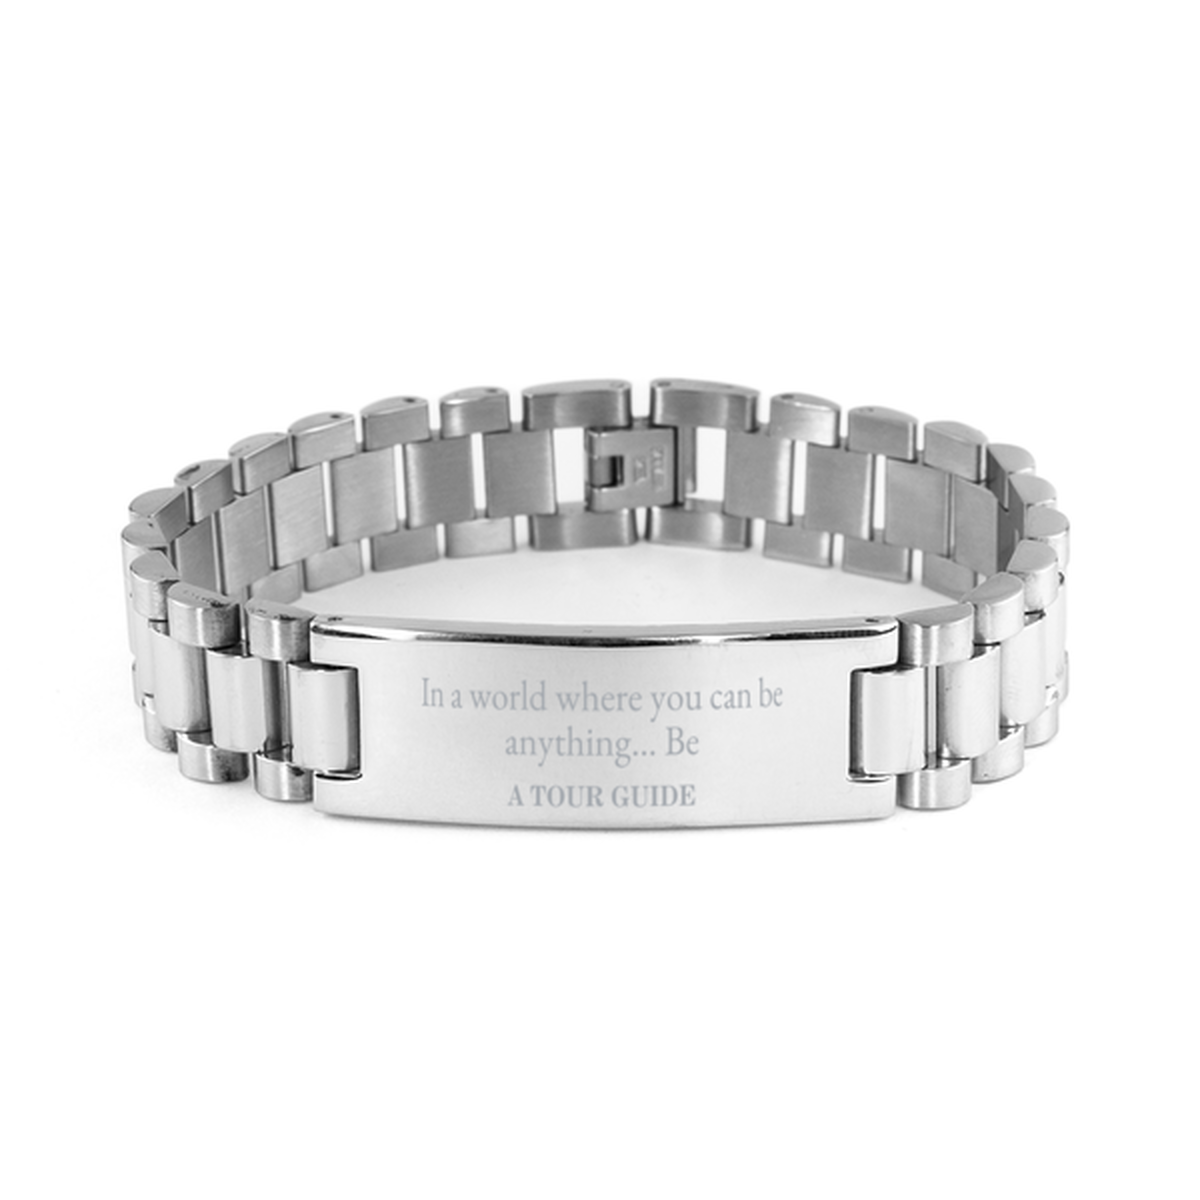 Gifts for Tour Guide, In a world where you can be anything, Appreciation Birthday Ladder Stainless Steel Bracelet for Men, Women, Friends, Coworkers